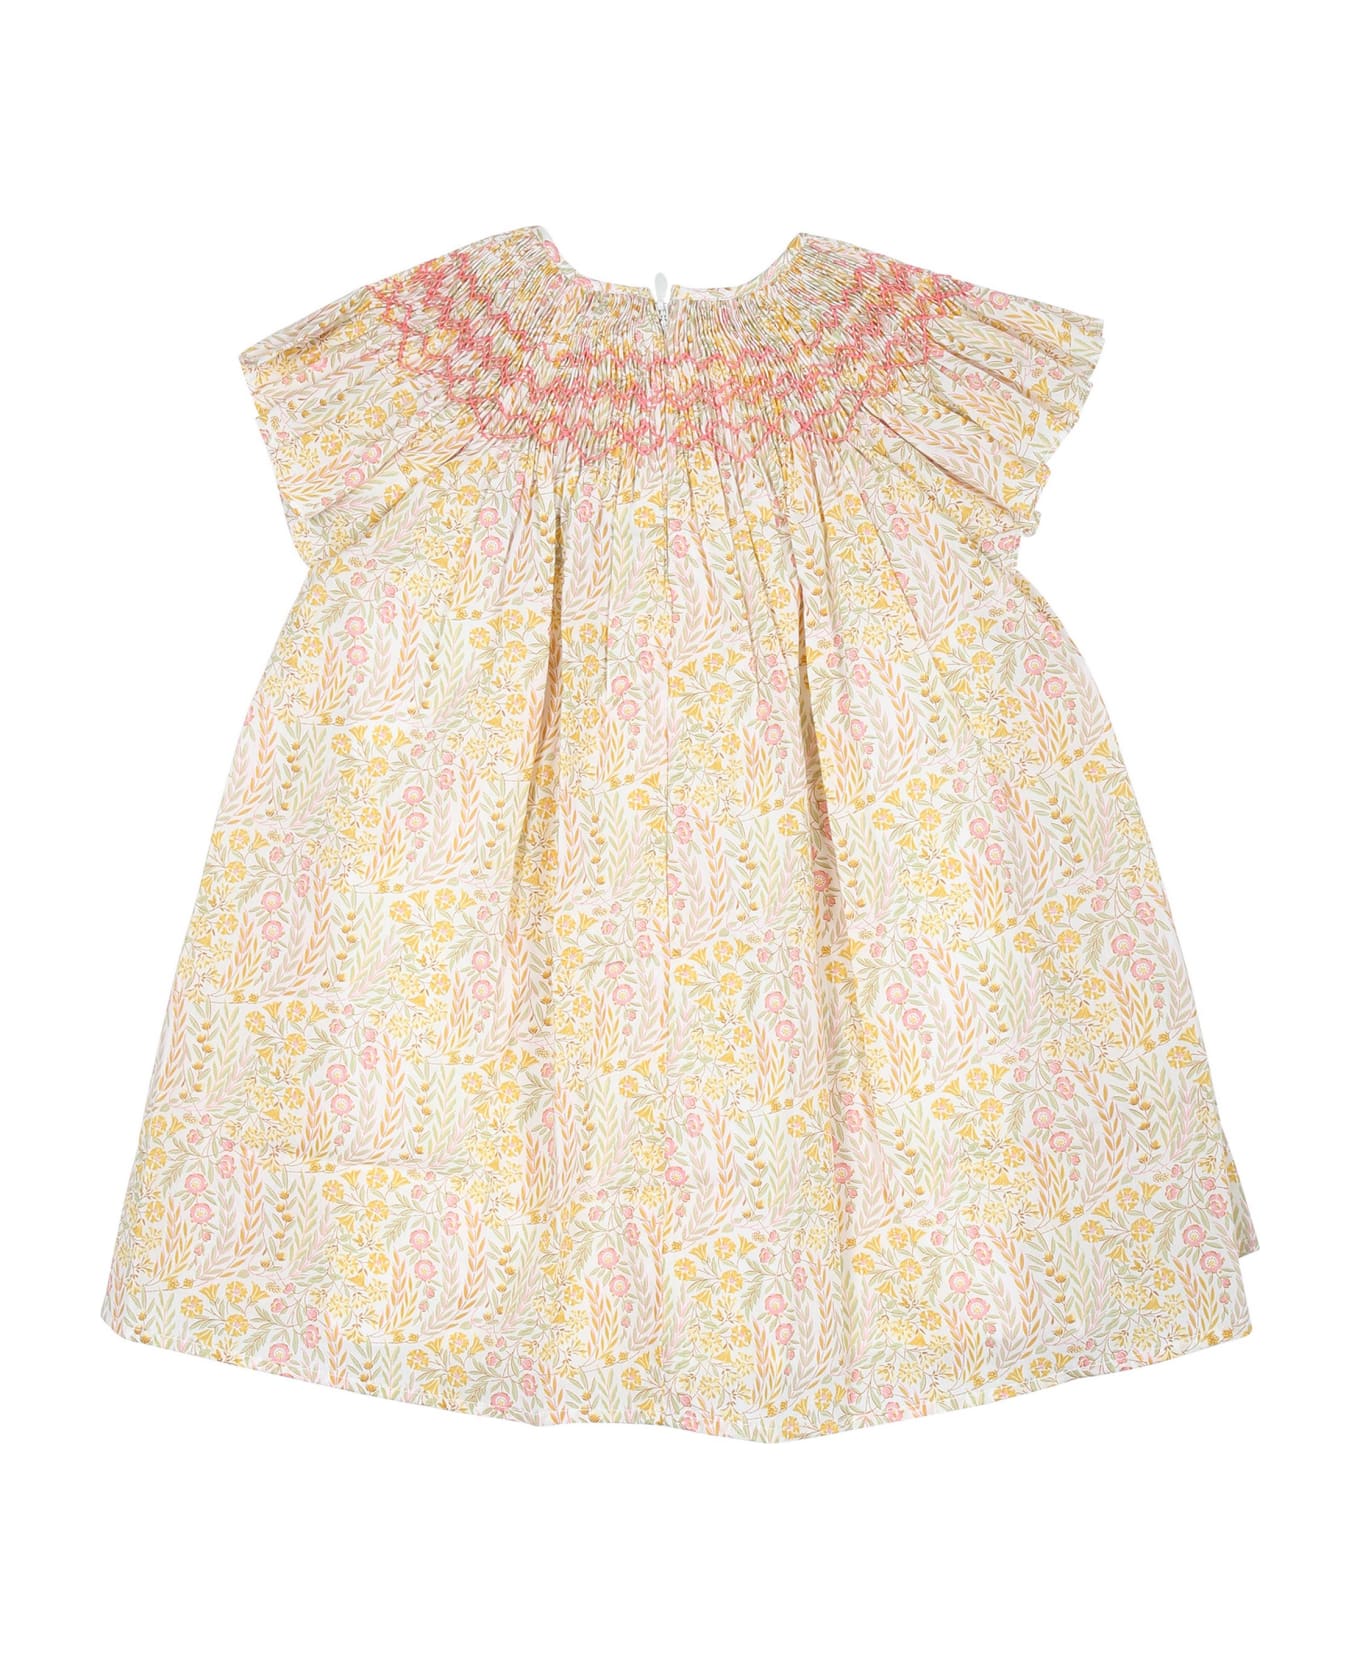 Tartine et Chocolat Ivory Casual Dress For Baby Girl With Liberty Fabric - Ivory ウェア